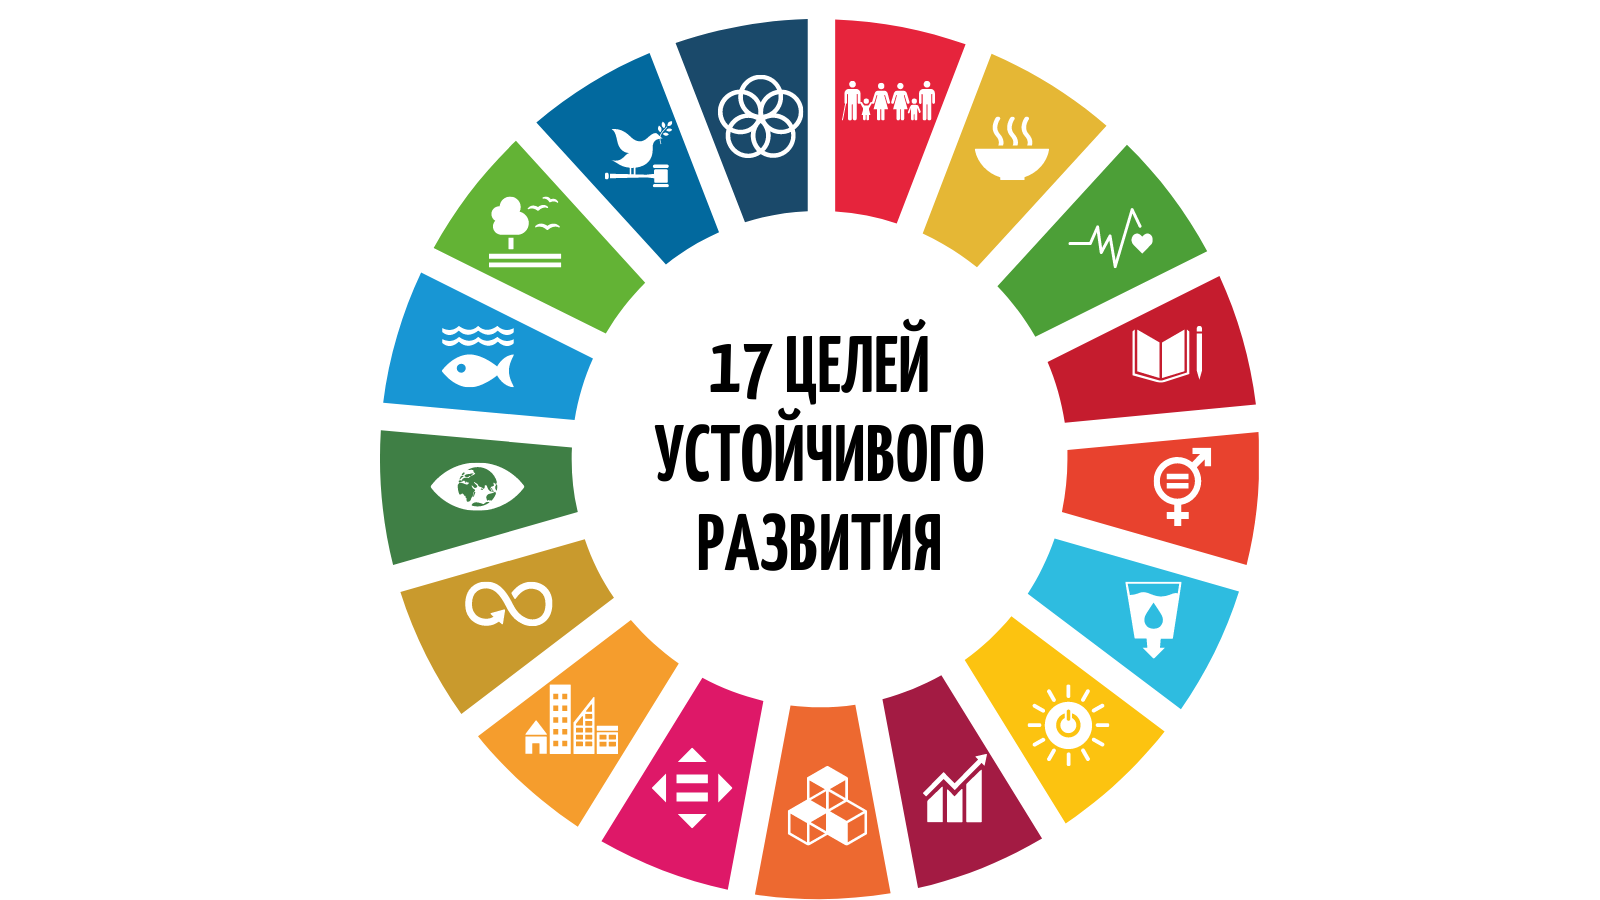 Activities carried out for the realization of the SDGs of the Department of Meteorology and Hydrology